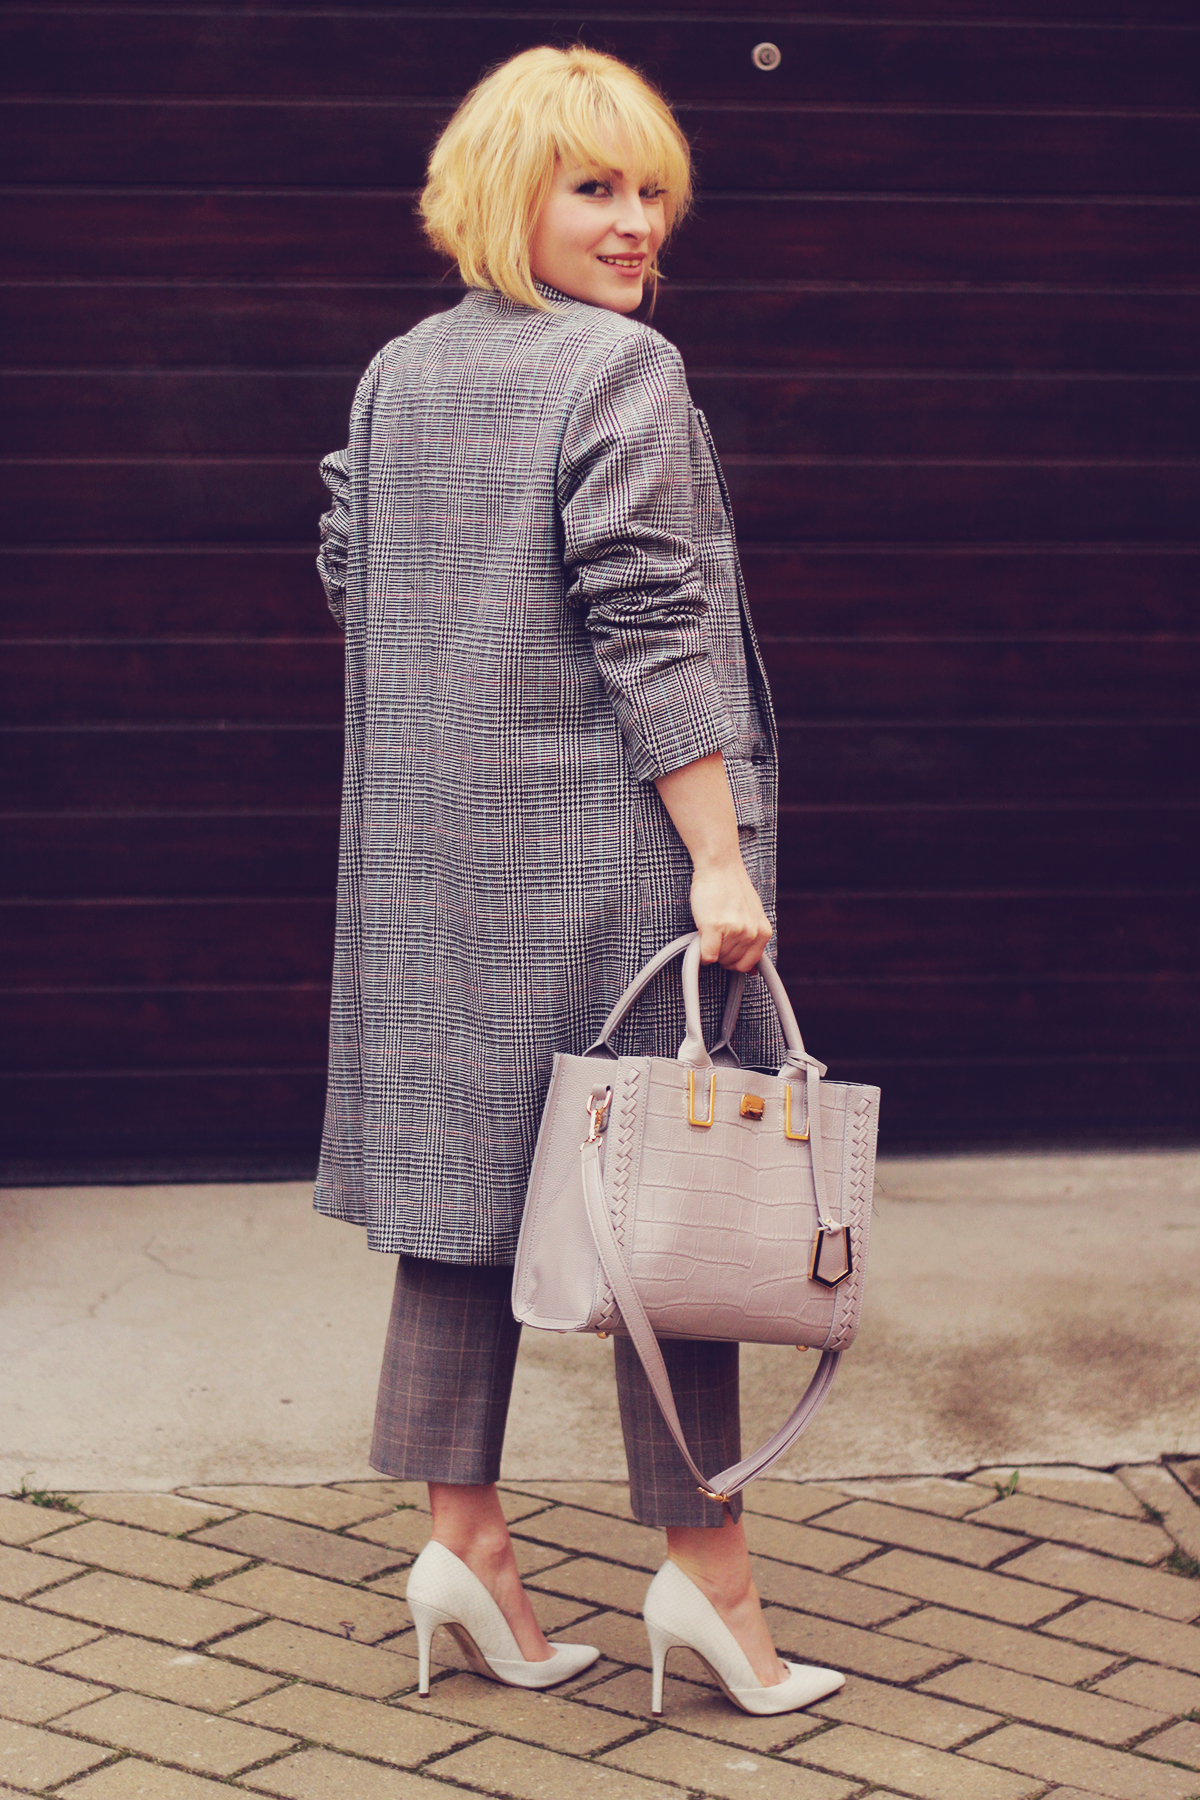 gingham coat and pants, white heels, tote bag, office look, work outfit inspiration